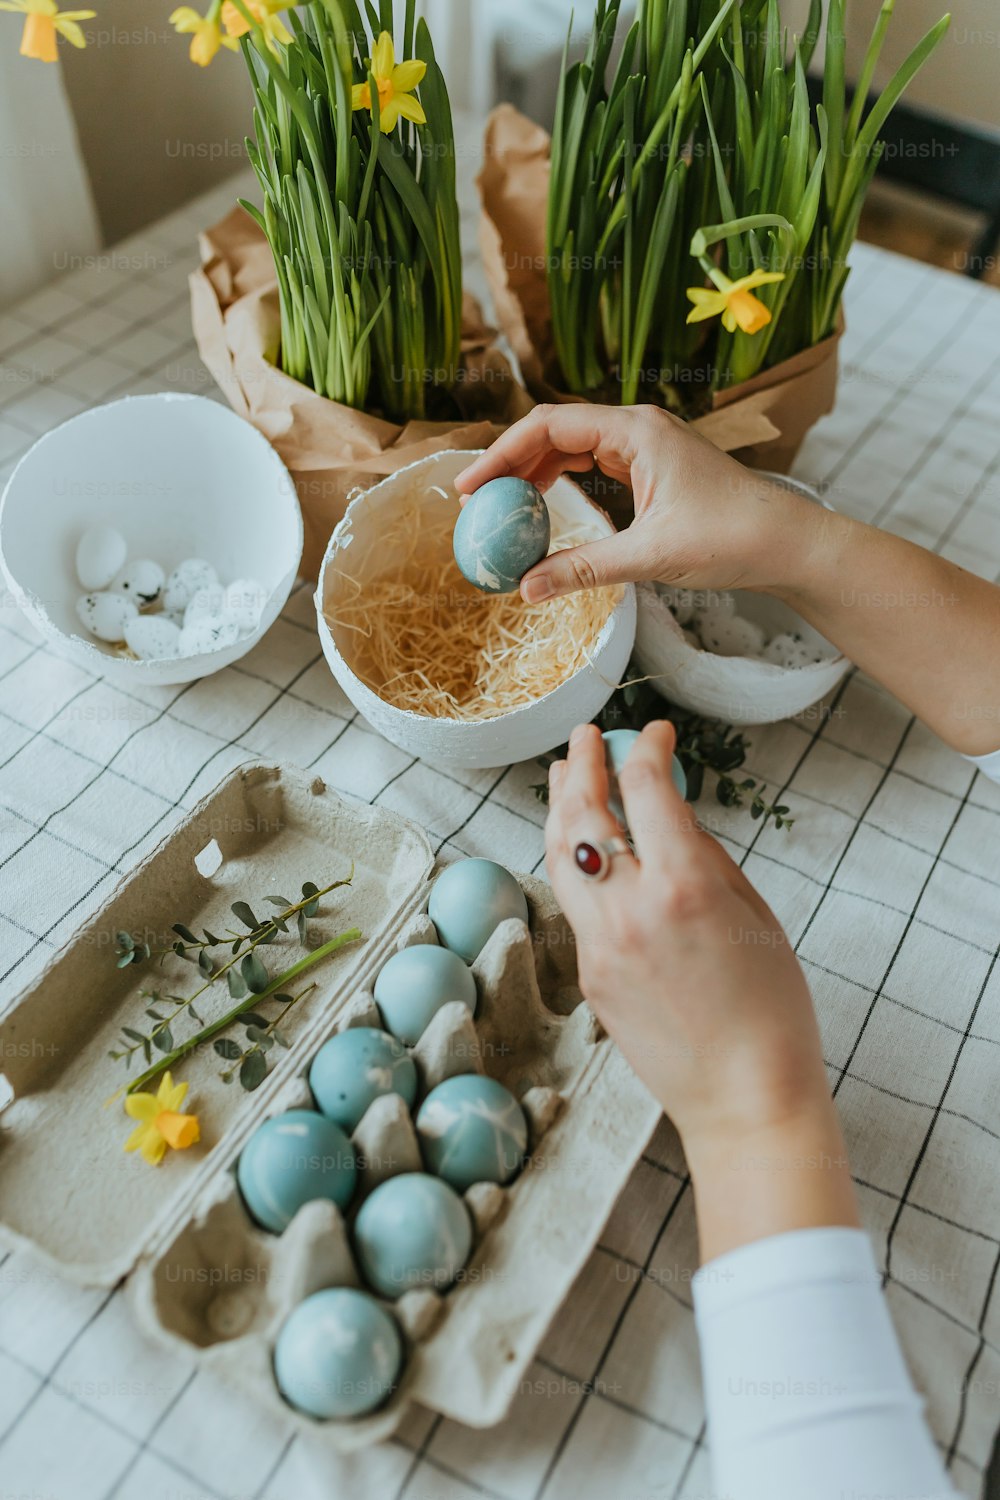 a person is decorating some eggs on a table